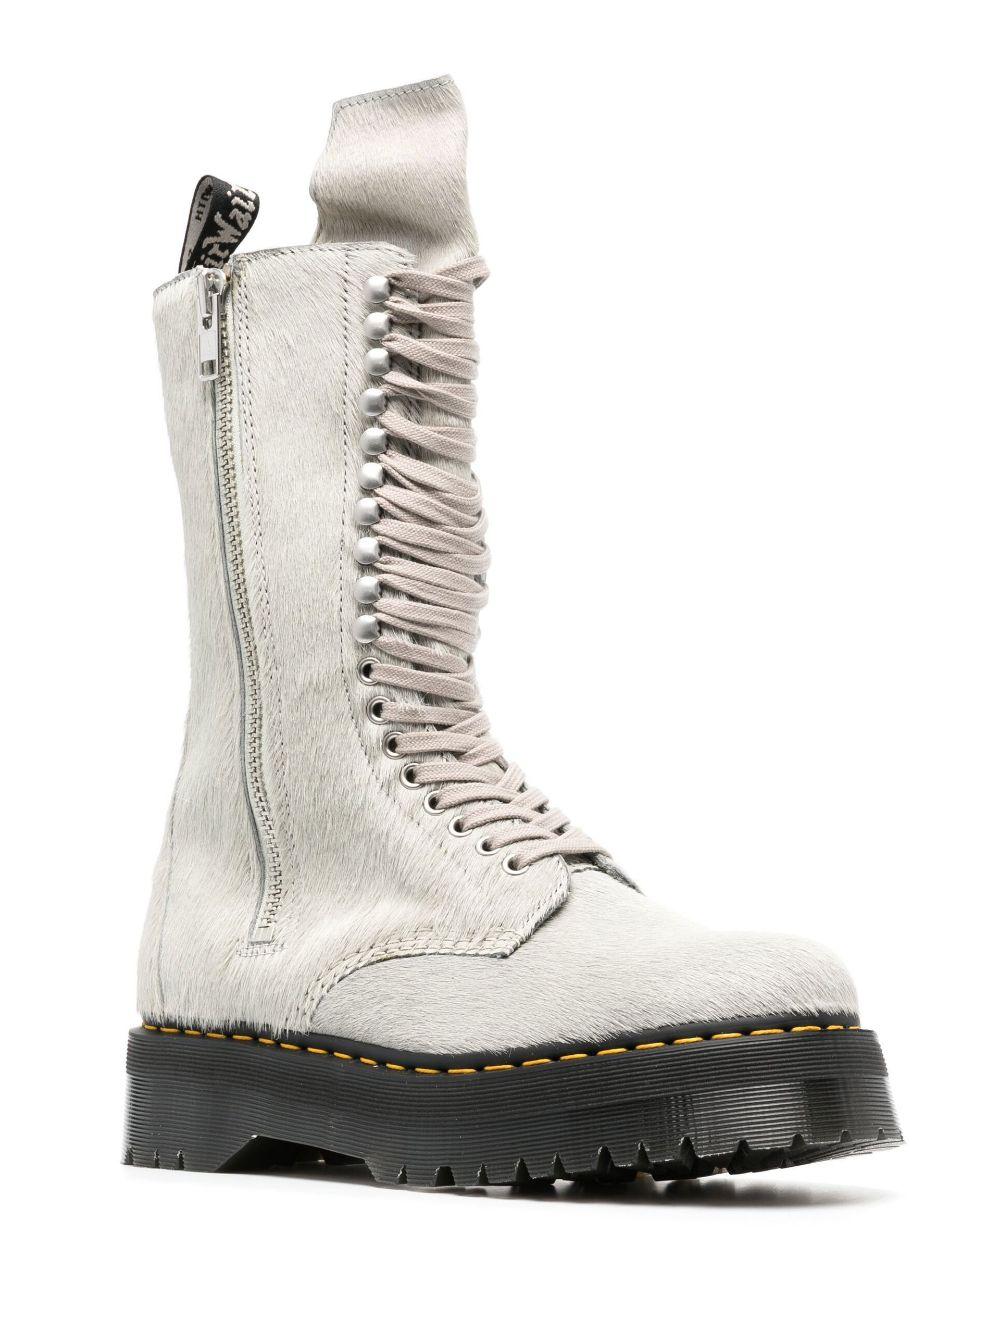 Rick Owens X Dr. Martens Quad Sole Boots in White for Men | Lyst